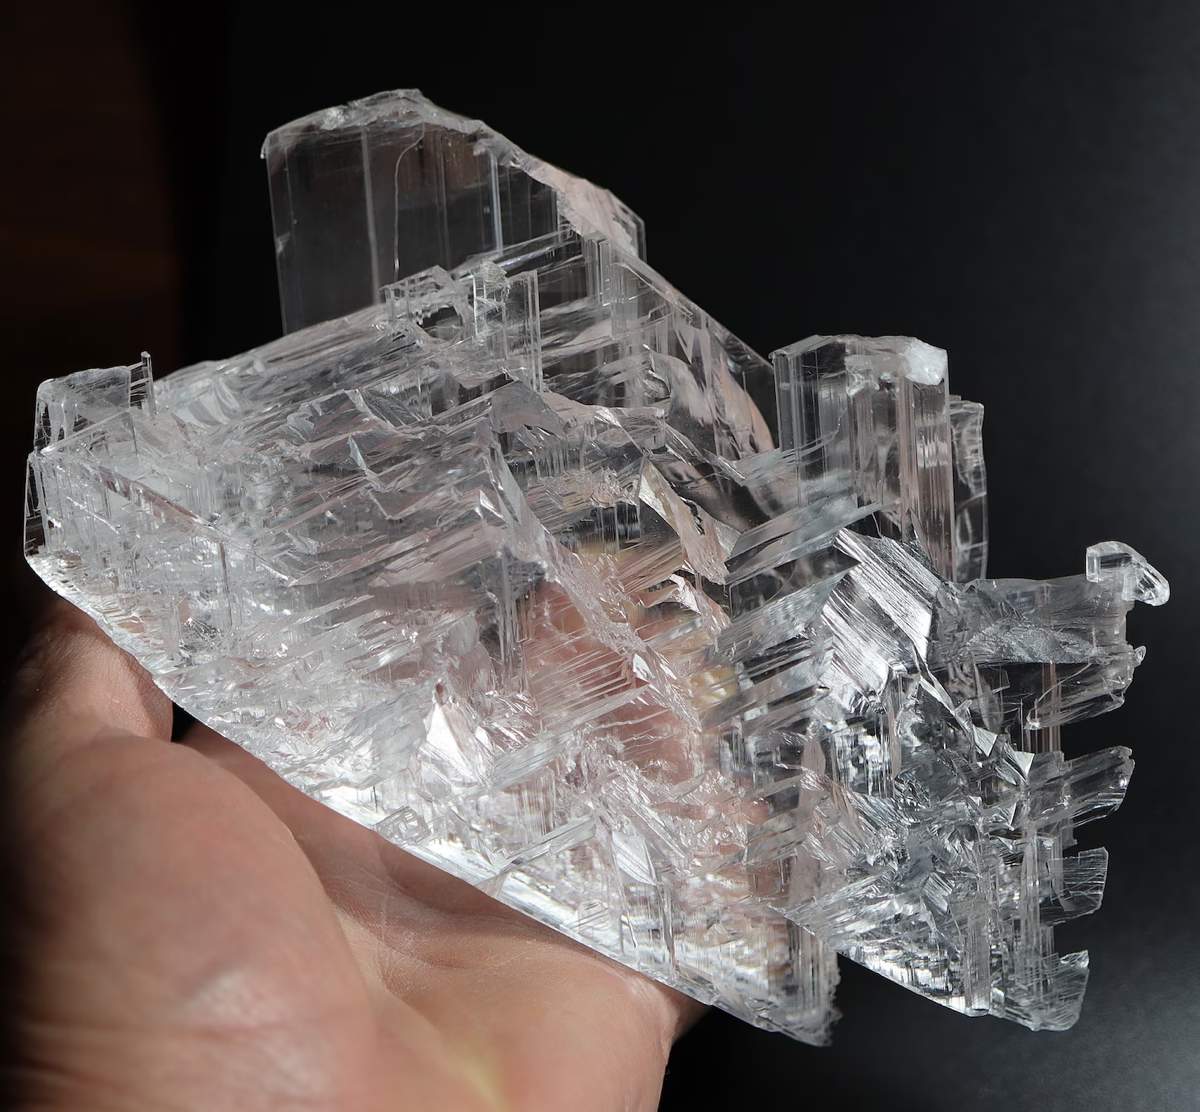 Complex Selenite crystal from The Naica Mine of Chihuahua, Mexico. Photo: GoldenHourMinerals